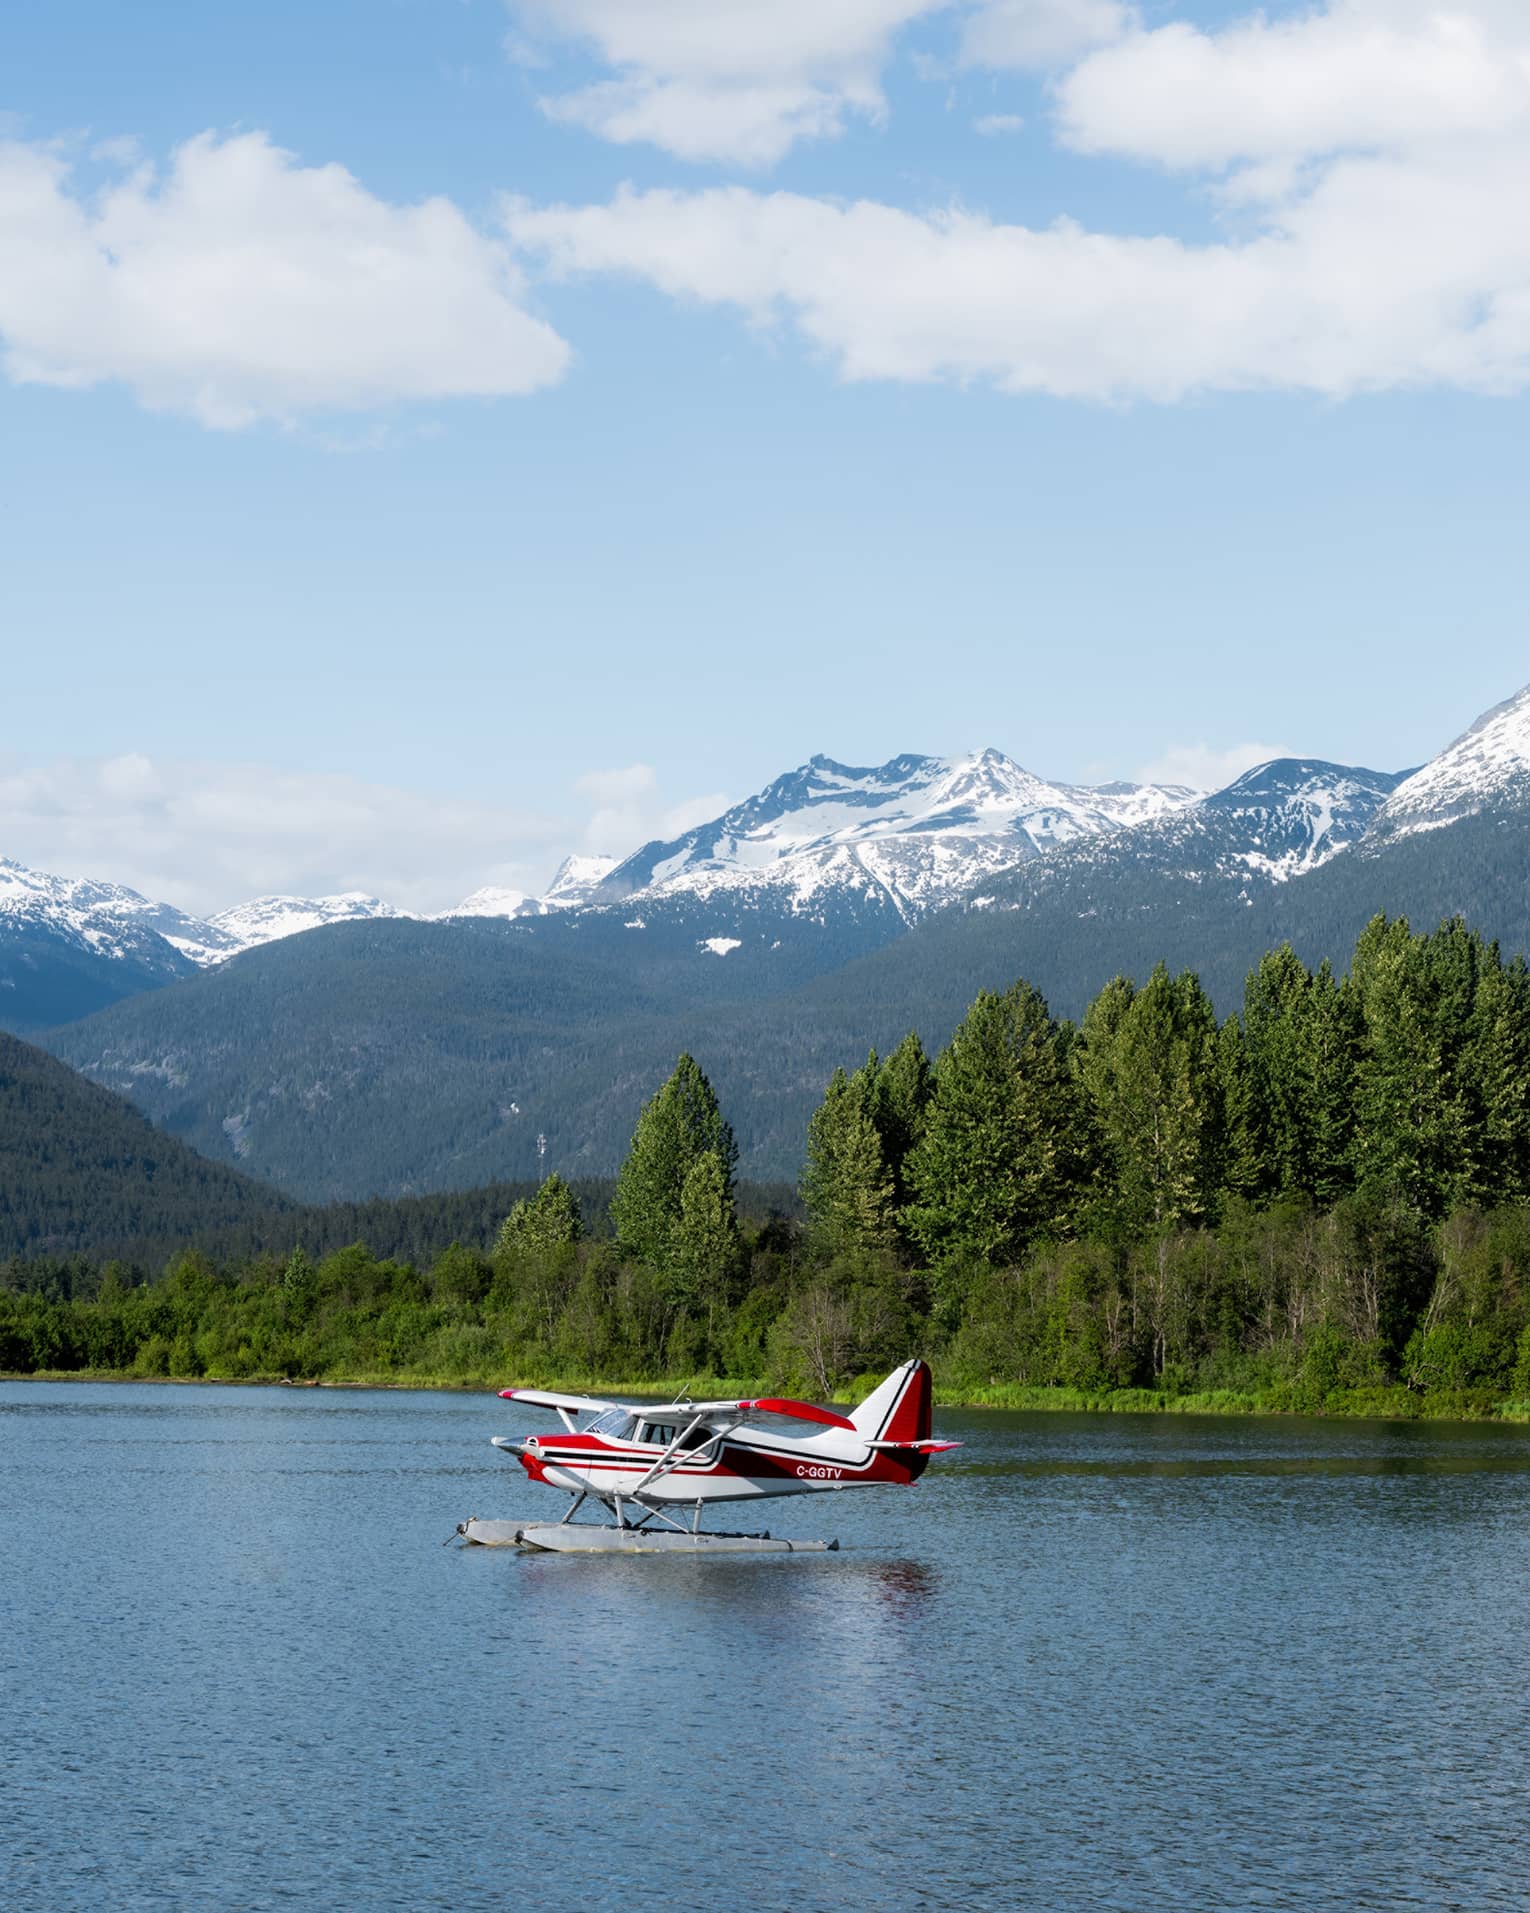 A small plane on a lake surrounded by forest with mountains in the background.